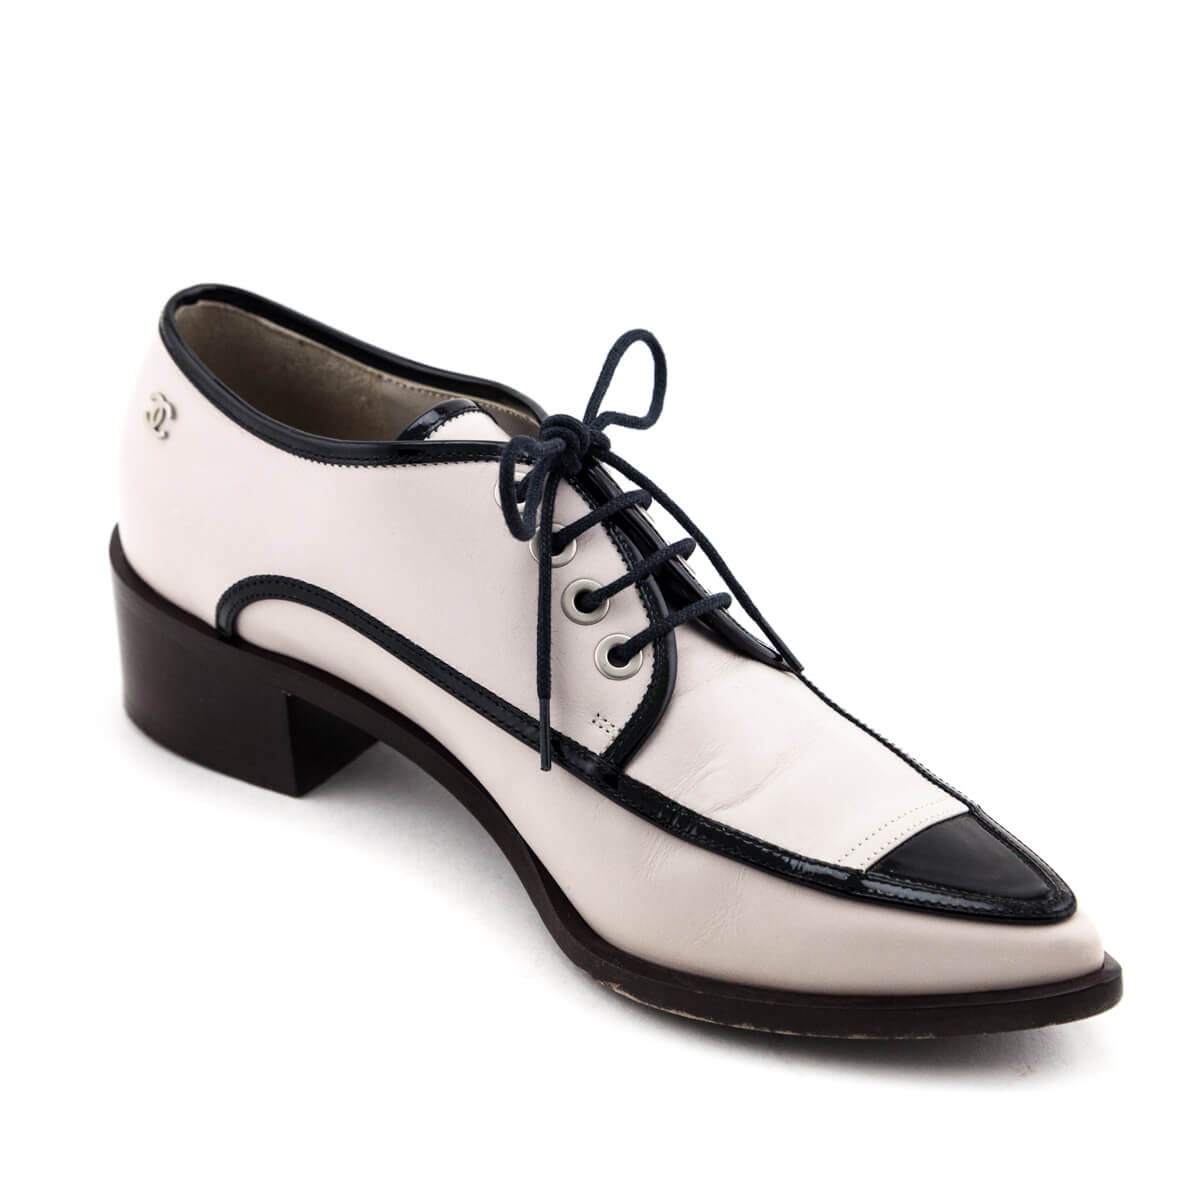 Chanel Black & White Pointed Toe Oxfords Size US 7 | EU 37 - Love that Bag etc - Preowned Authentic Designer Handbags & Preloved Fashions